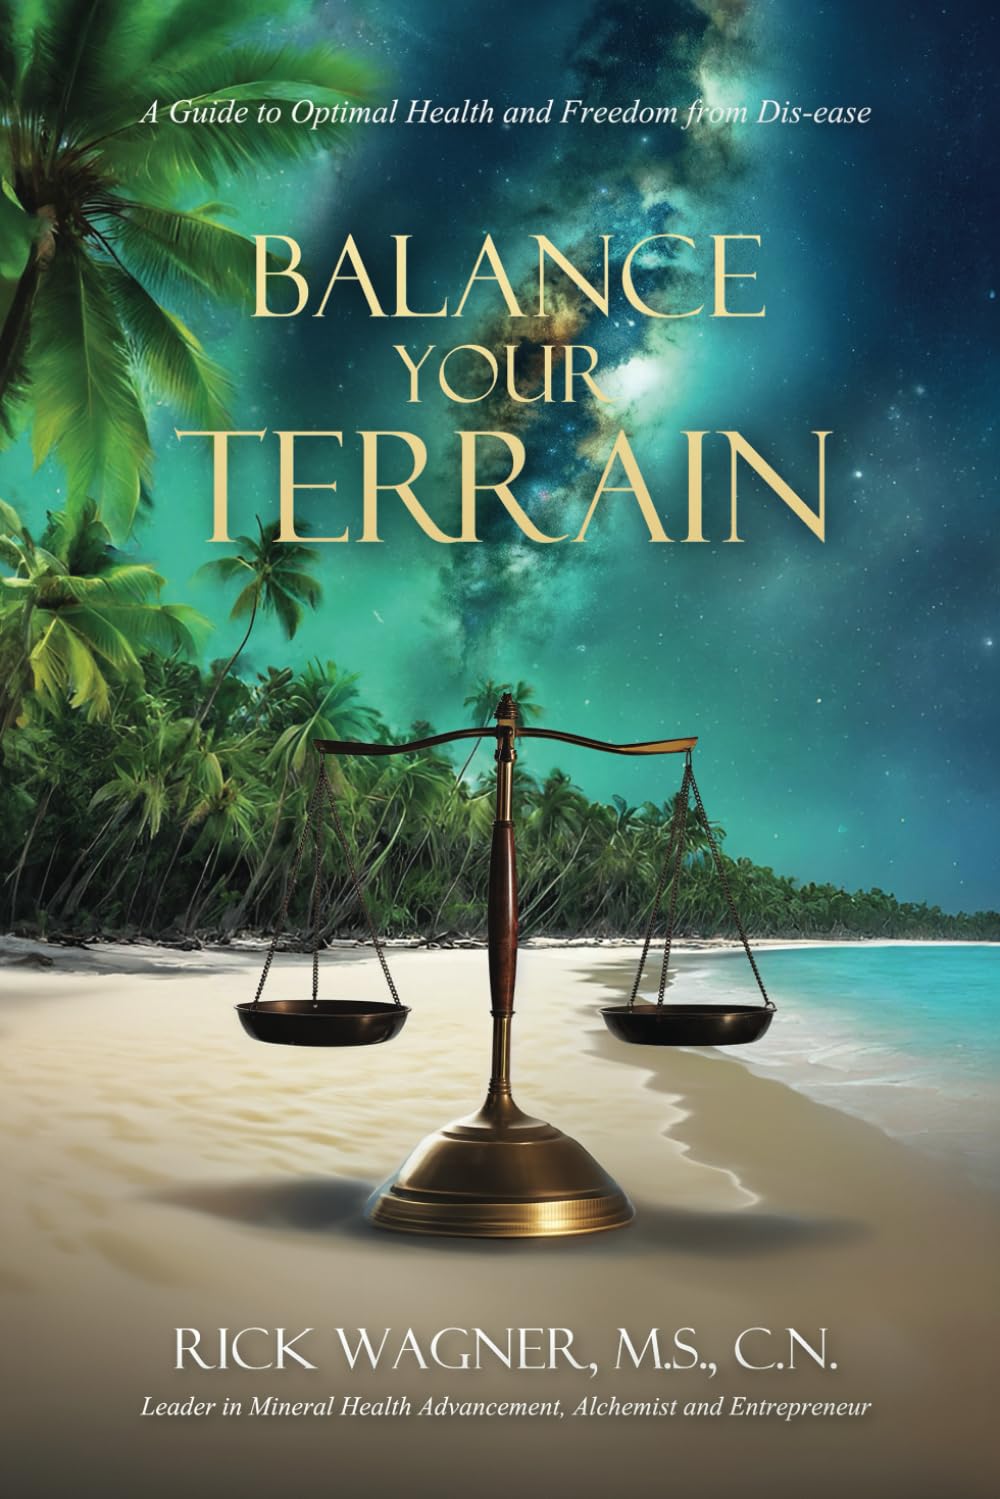 a.	Balance Your Terrain: A Guide to Optimal Health and Freedom from Dis-ease